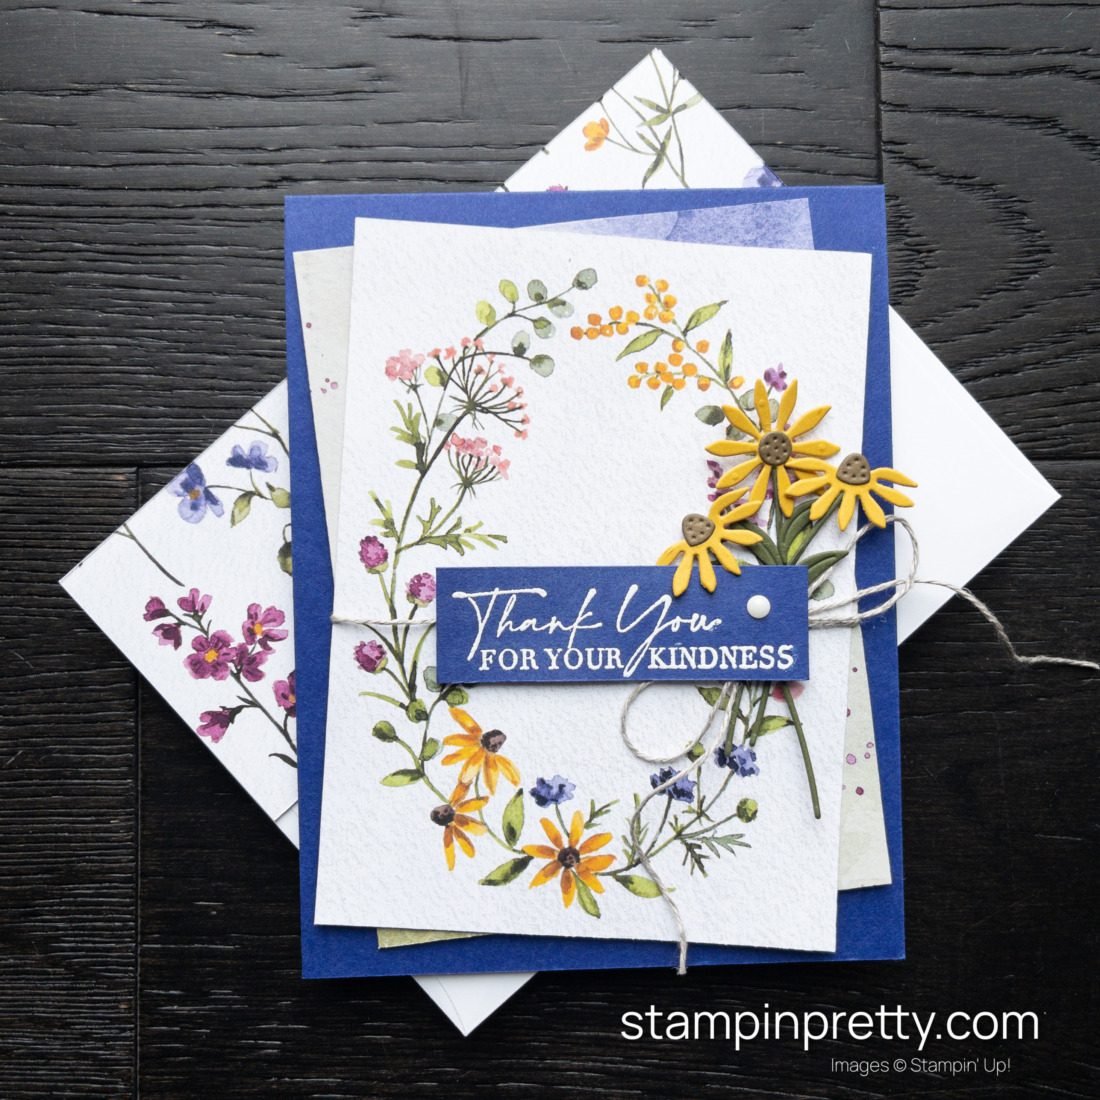 A Handmade Thank You Card Using the Dainty Delight Bundle and Coordinating Dainty Flowers DSP by Stampin' Up! Mary Fish, Stampin' Pretty